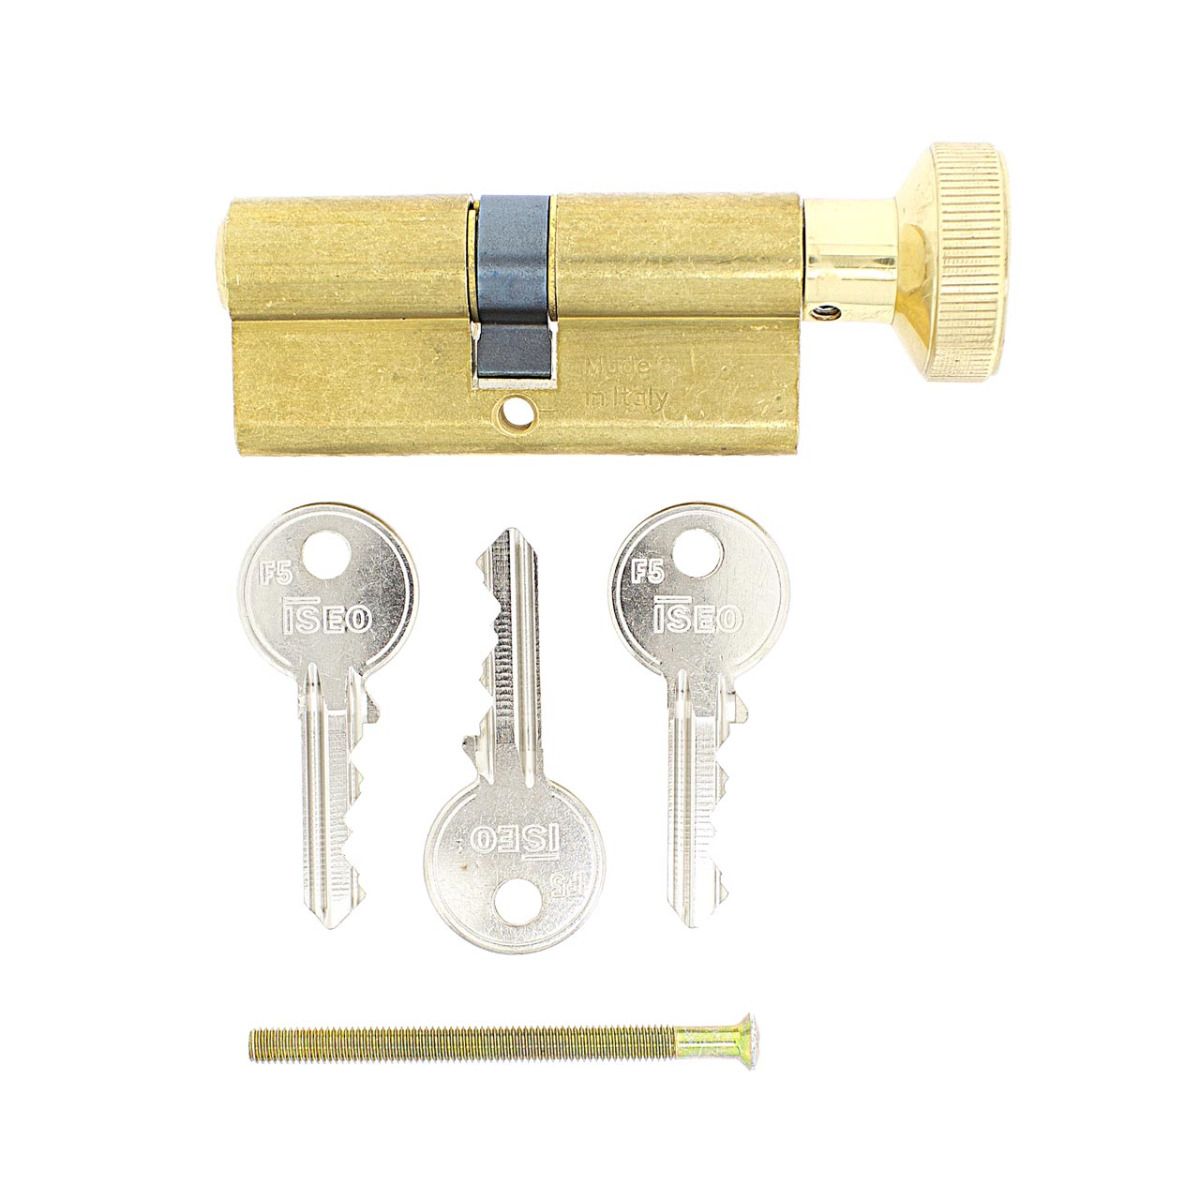 Dimensions Image: ISEO 5 Pin F5 Euro Thumb-turn cylinders